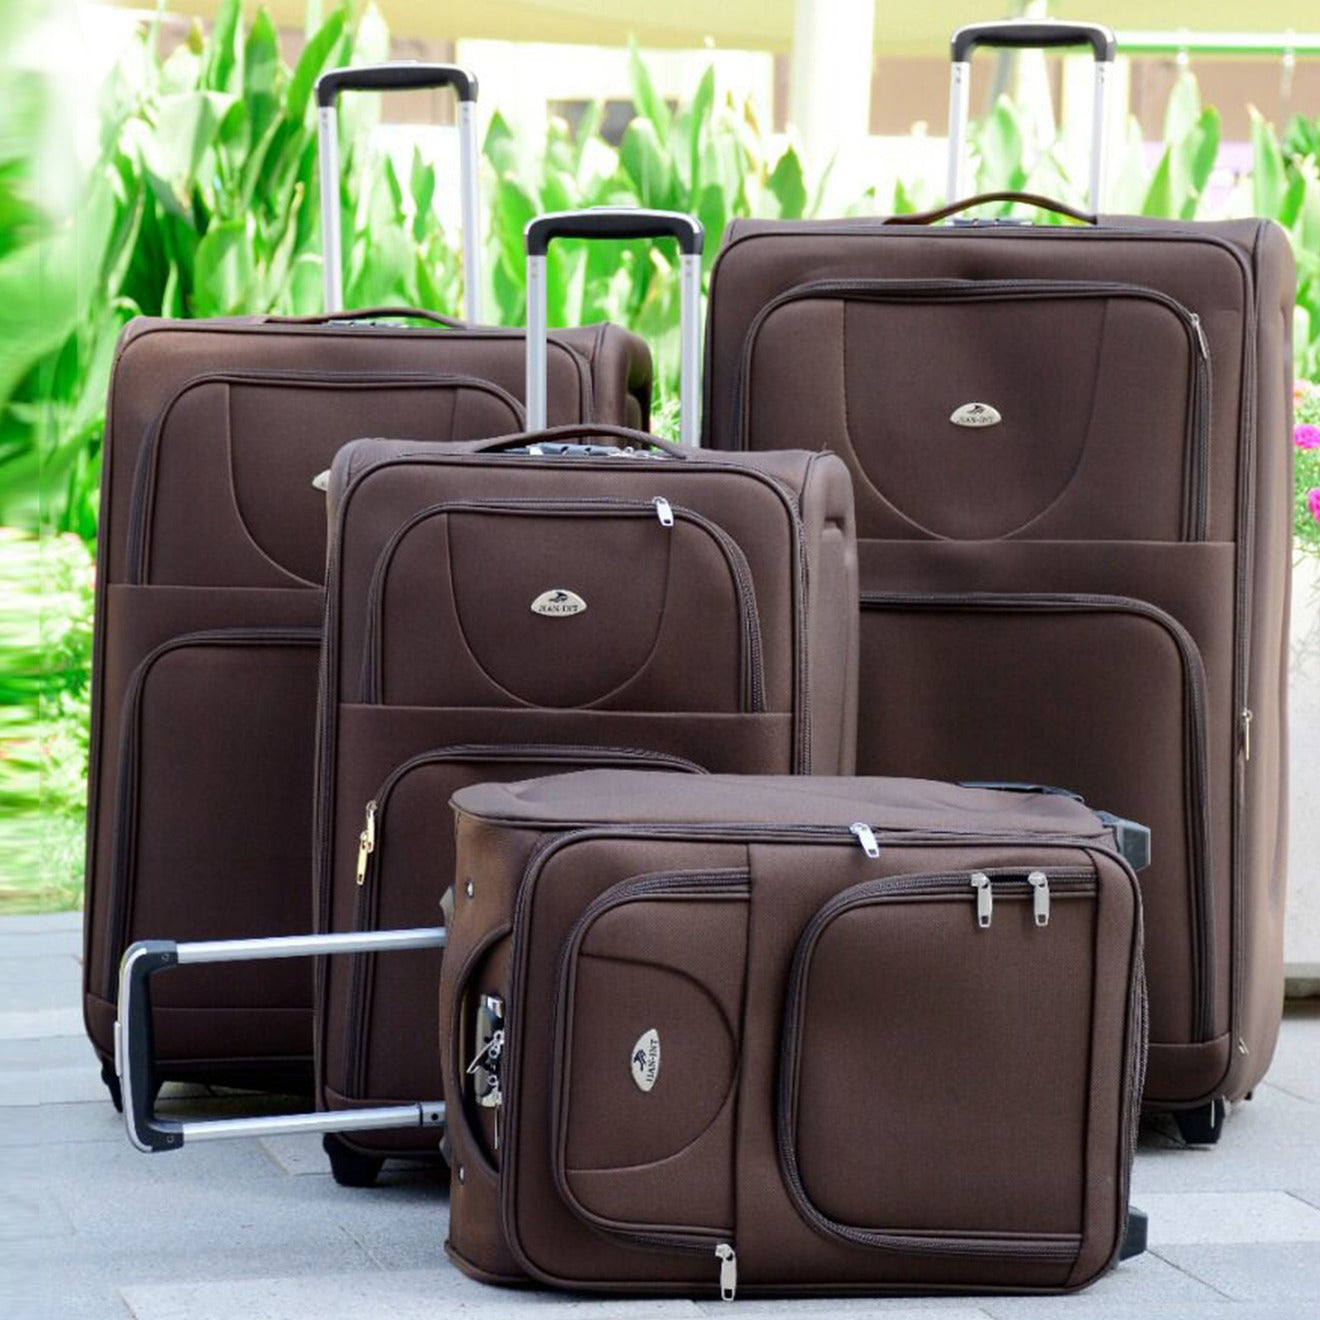 4 Piece Full Set 20" 24" 28" 32 Inches 2 Wheel Soft Material Travel Luggage Bag